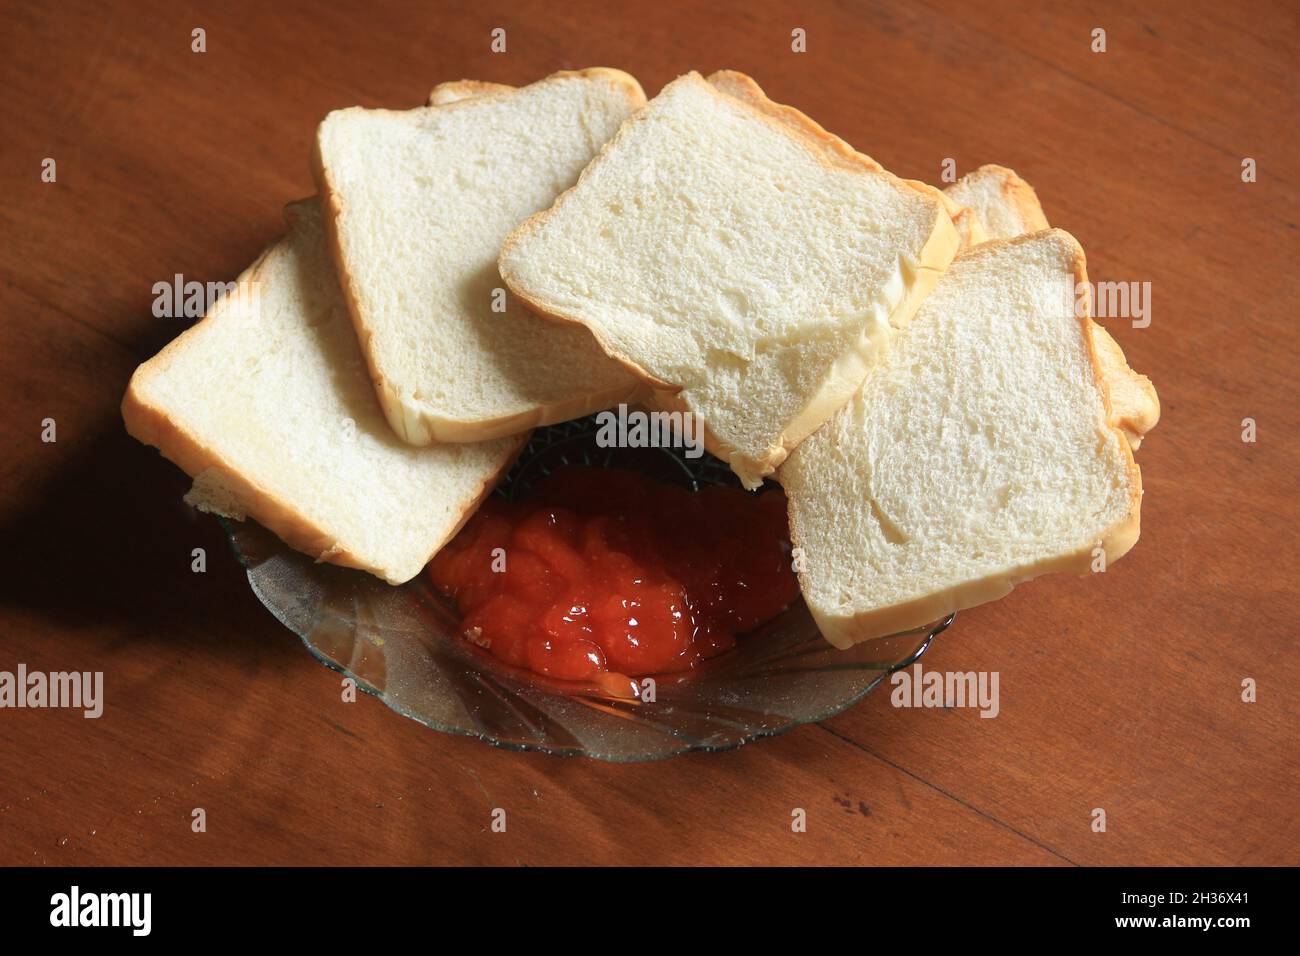 slices of fragrant white bread and fresh sauce for sandwiches, burgers, and more. Stock Photo